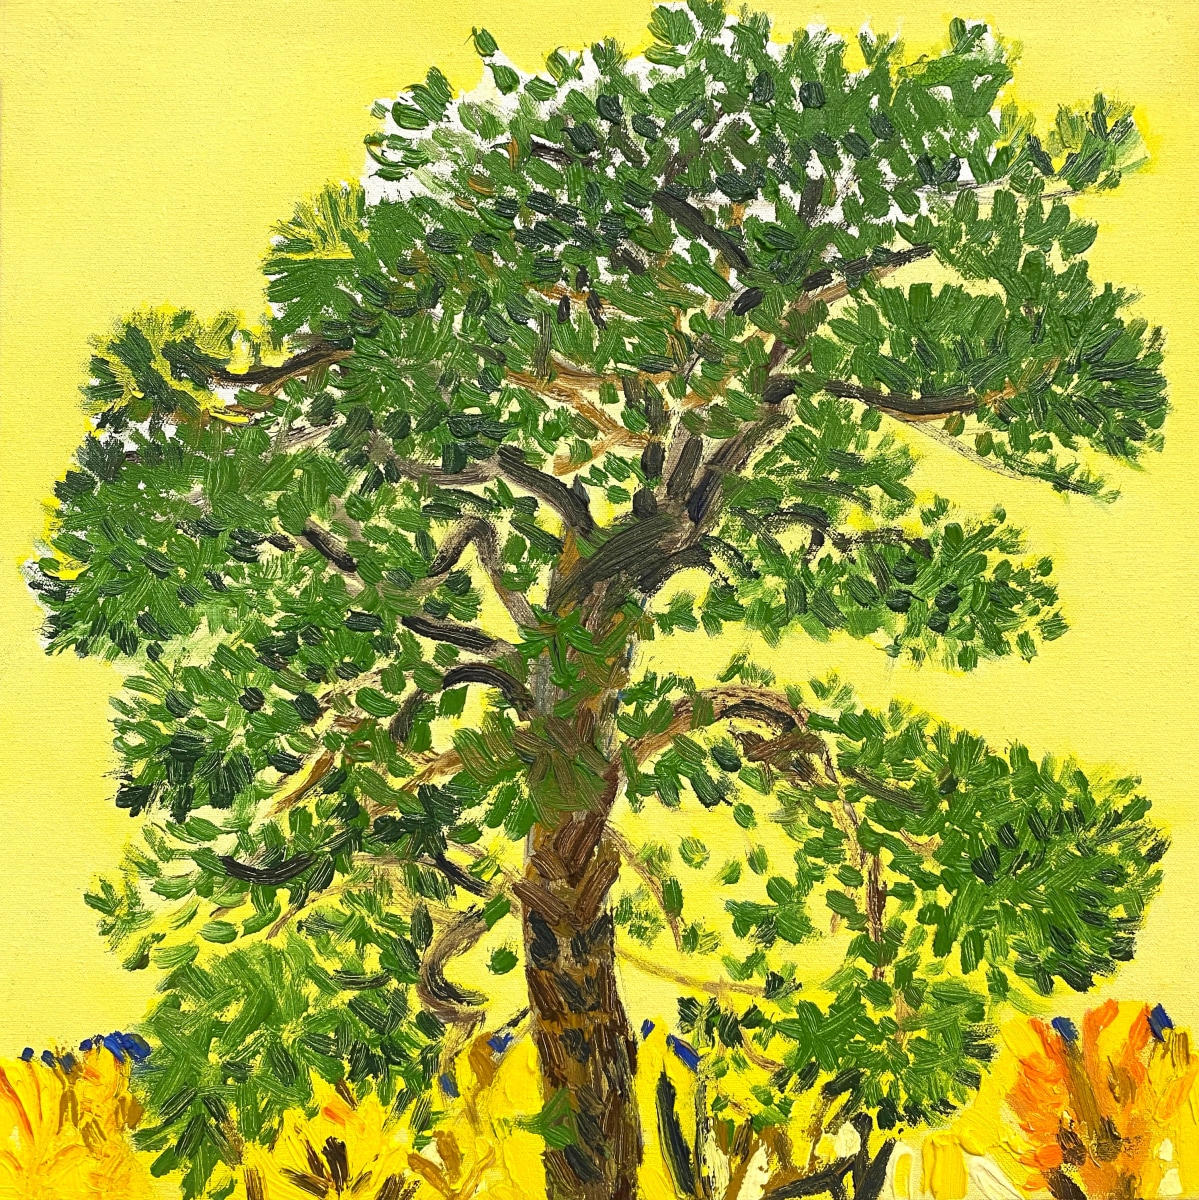 Oil painting of a tree with a yellow background